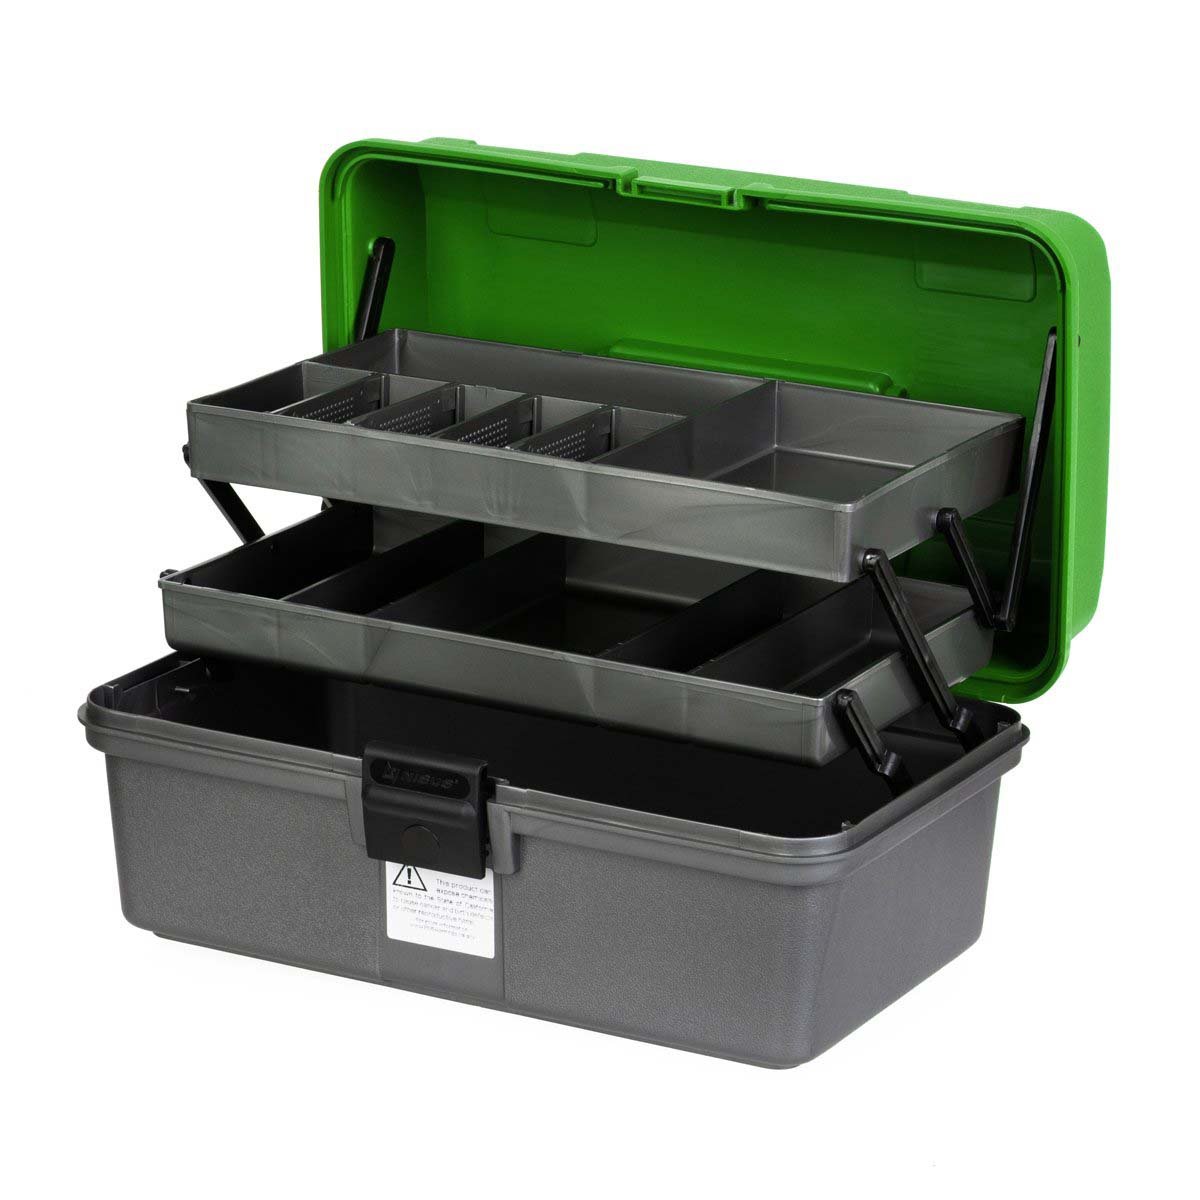 Fishing Tackle Box 2 Fold Out Multi-Tier Trays Fishing Gear at a low price